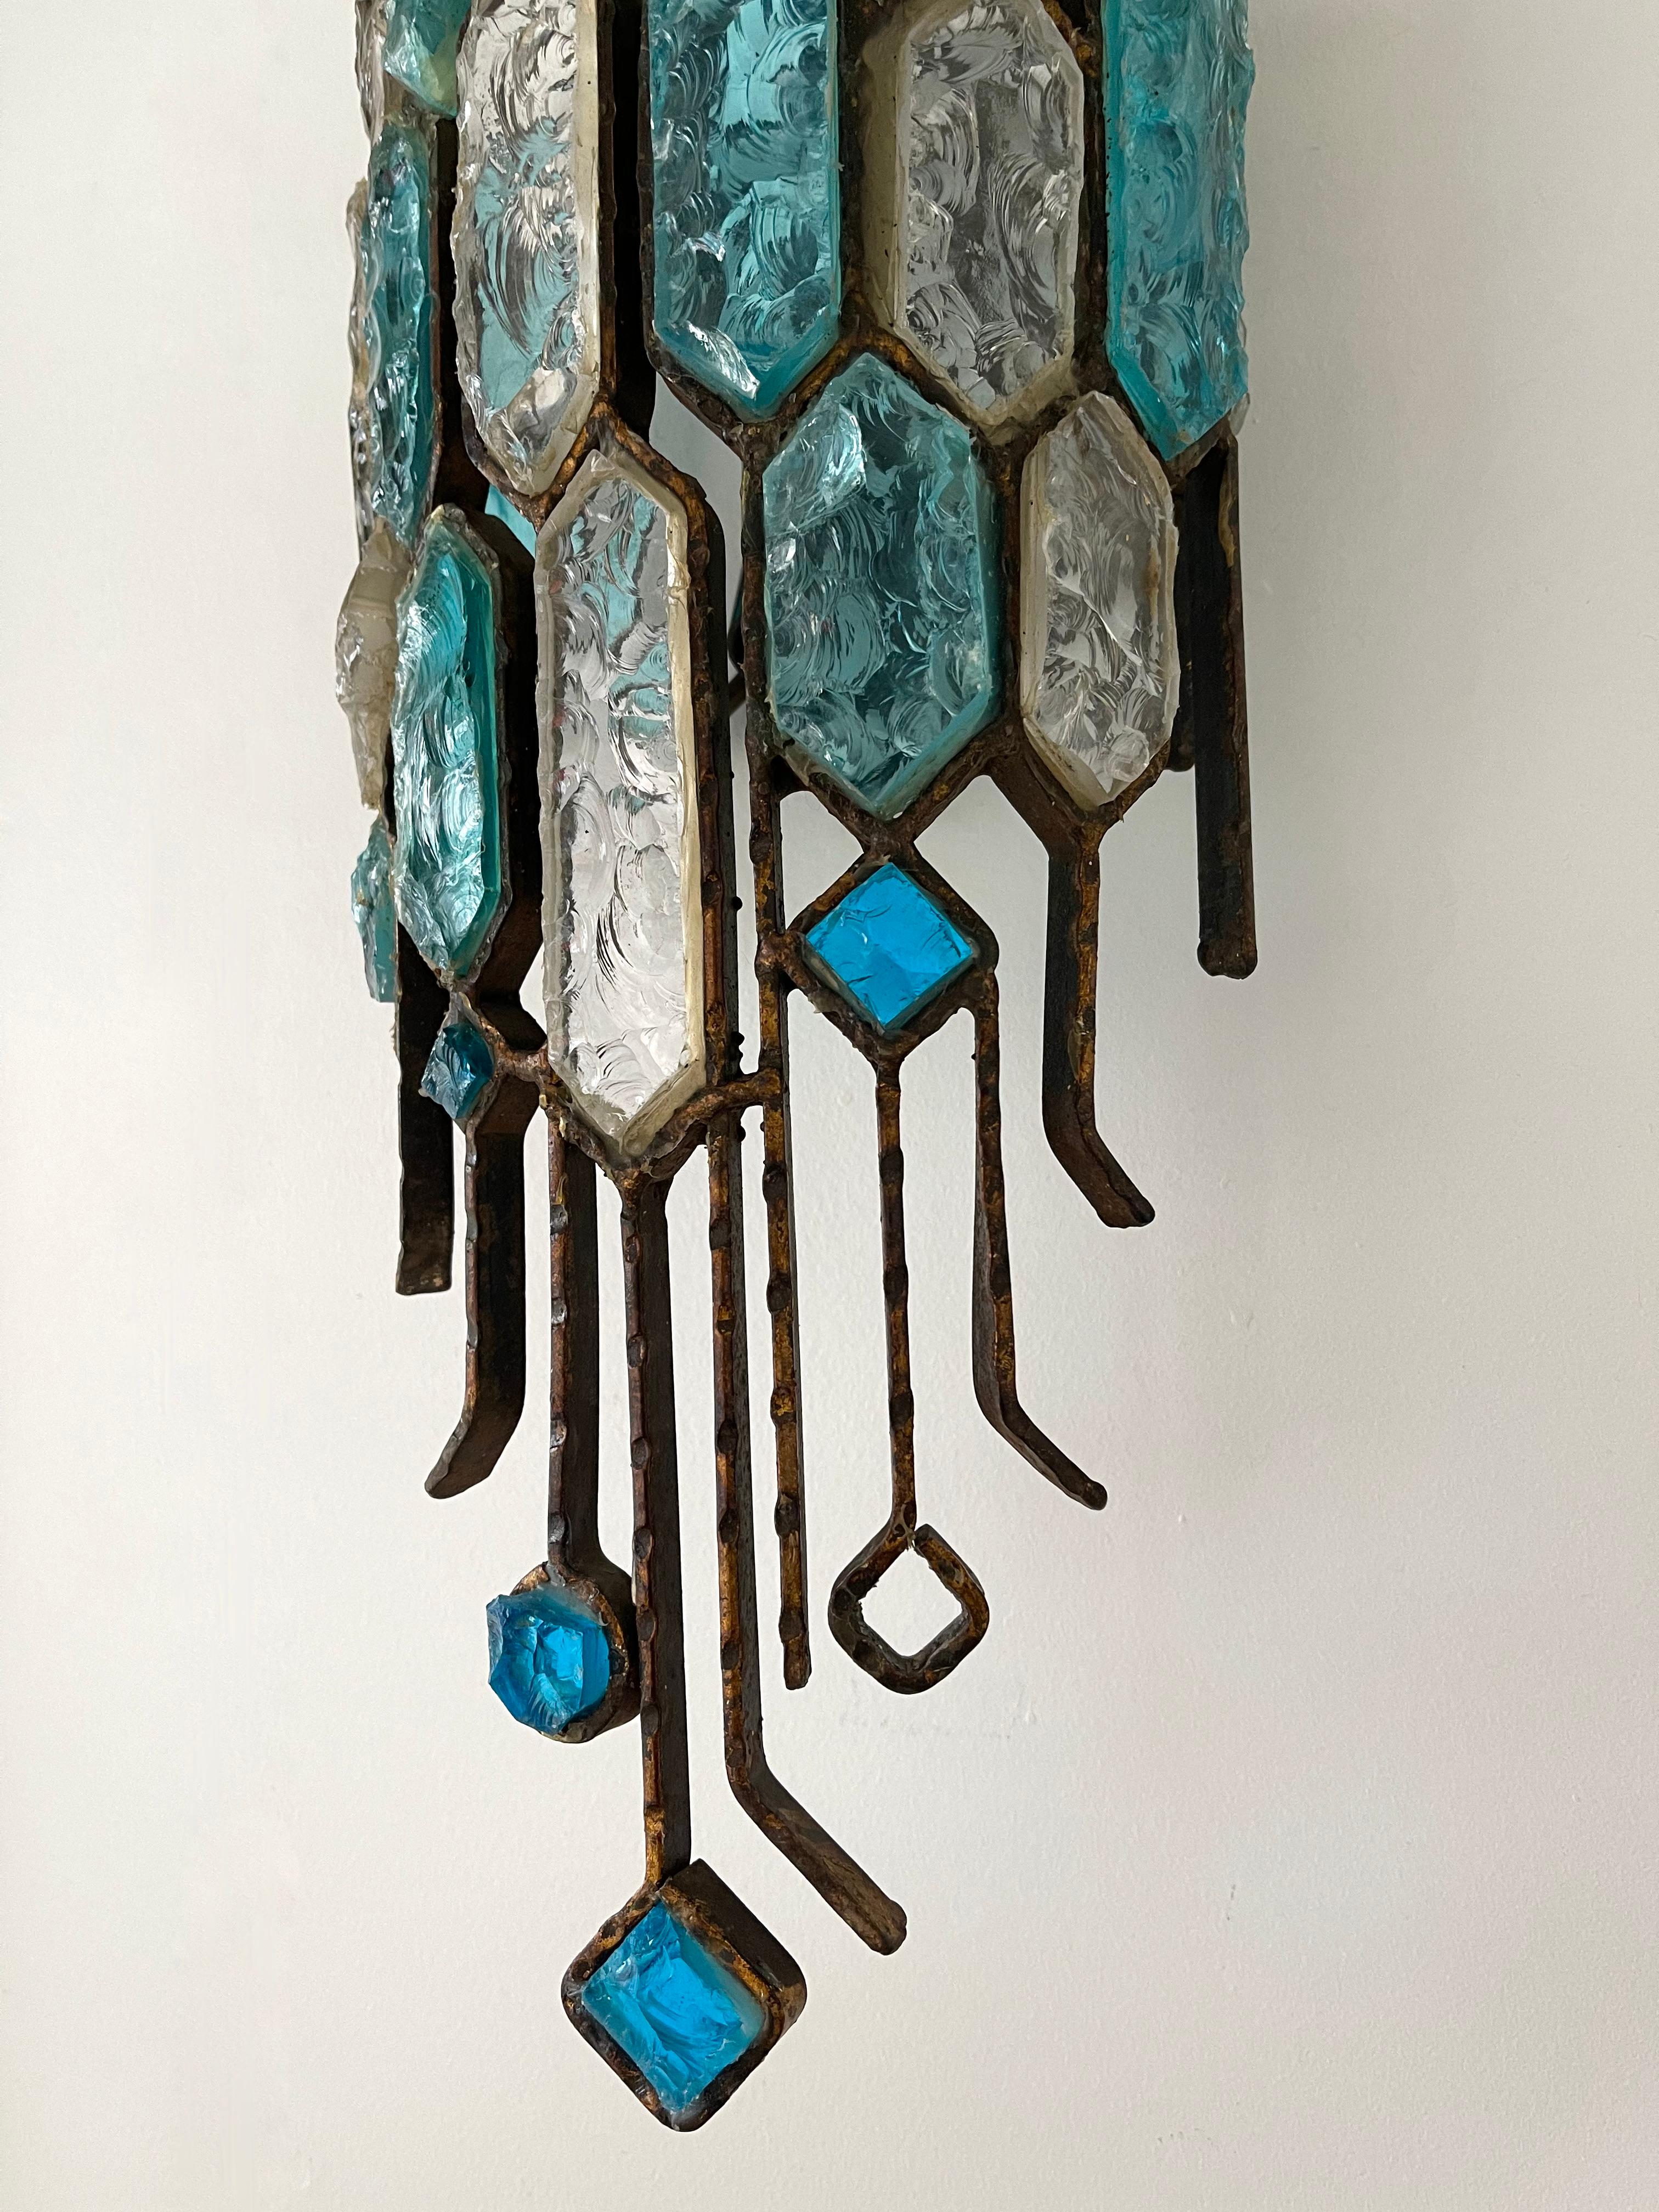 Pair of wall lamps lights sconces hammered glass and wrought iron by the manufacture Longobard in Verona in a Brutalist style, the concurrent of Biancardi Jordan Arte and Poliarte during the 1970s. Rare combination of glass blue and clear